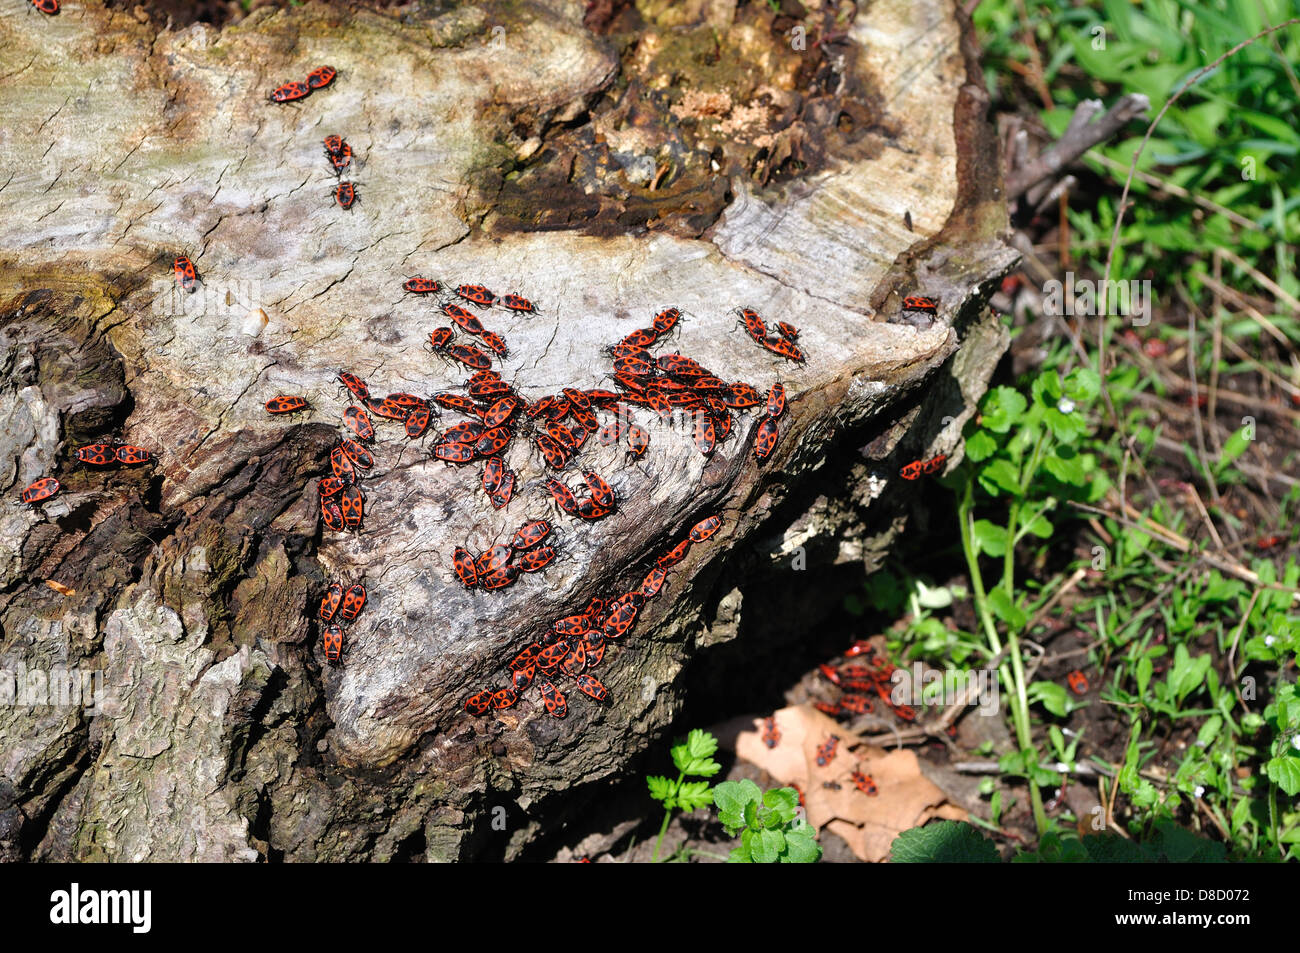 picture of a firebug colony on a cutoff tree trunk Stock Photo